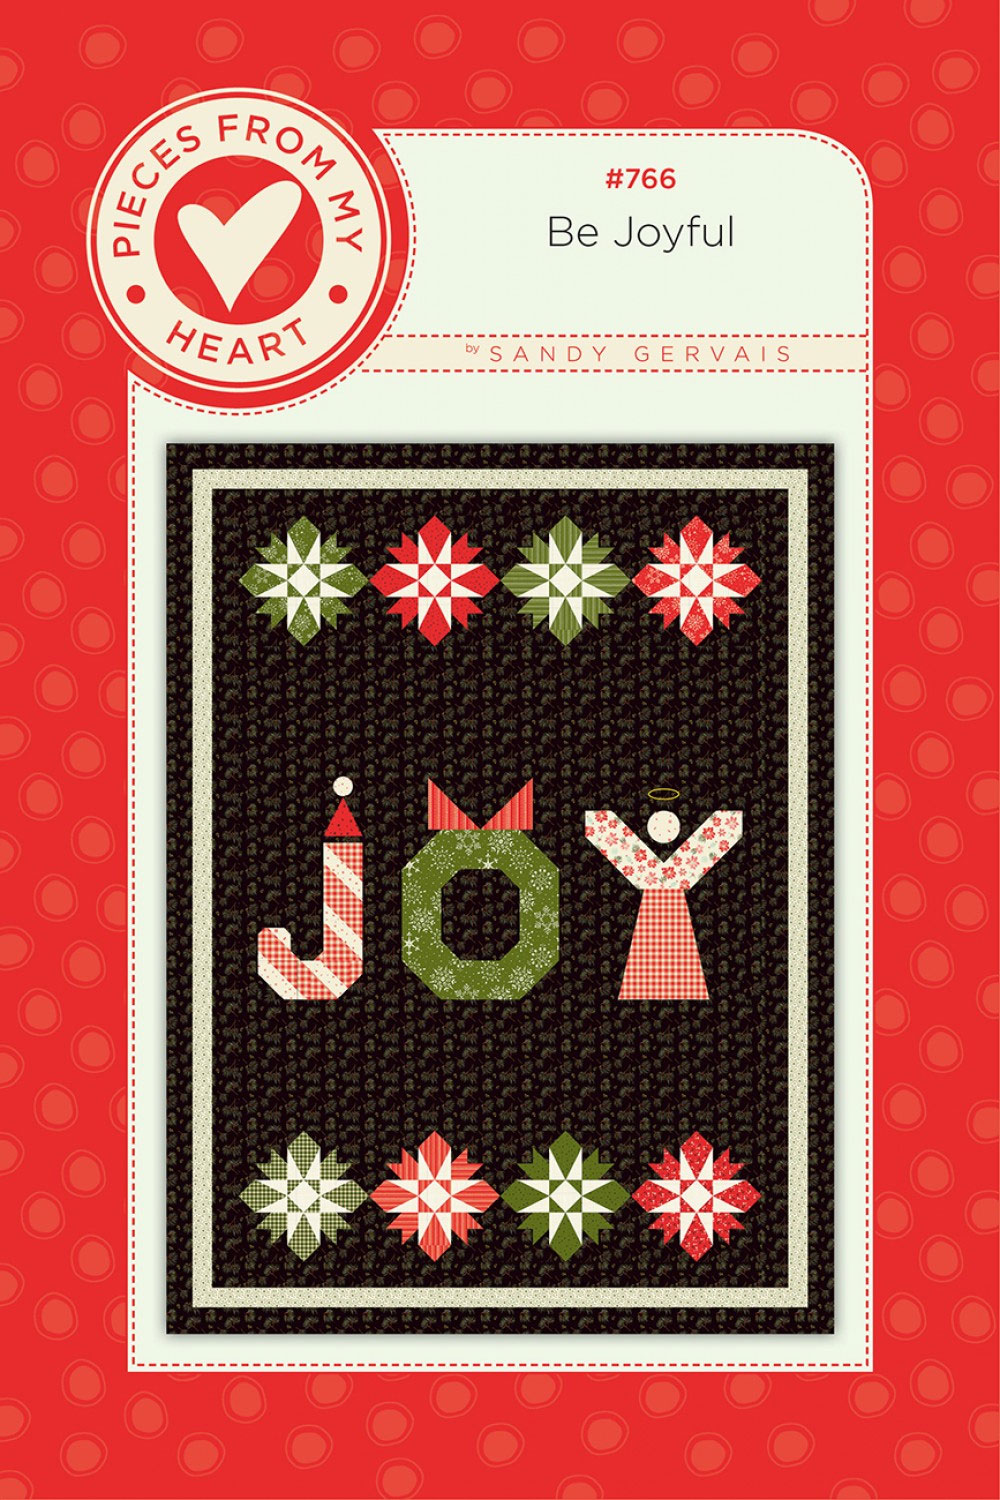 Be-Joyful-quilt-sewing-pattern-Pieces-From-My-Heart-front